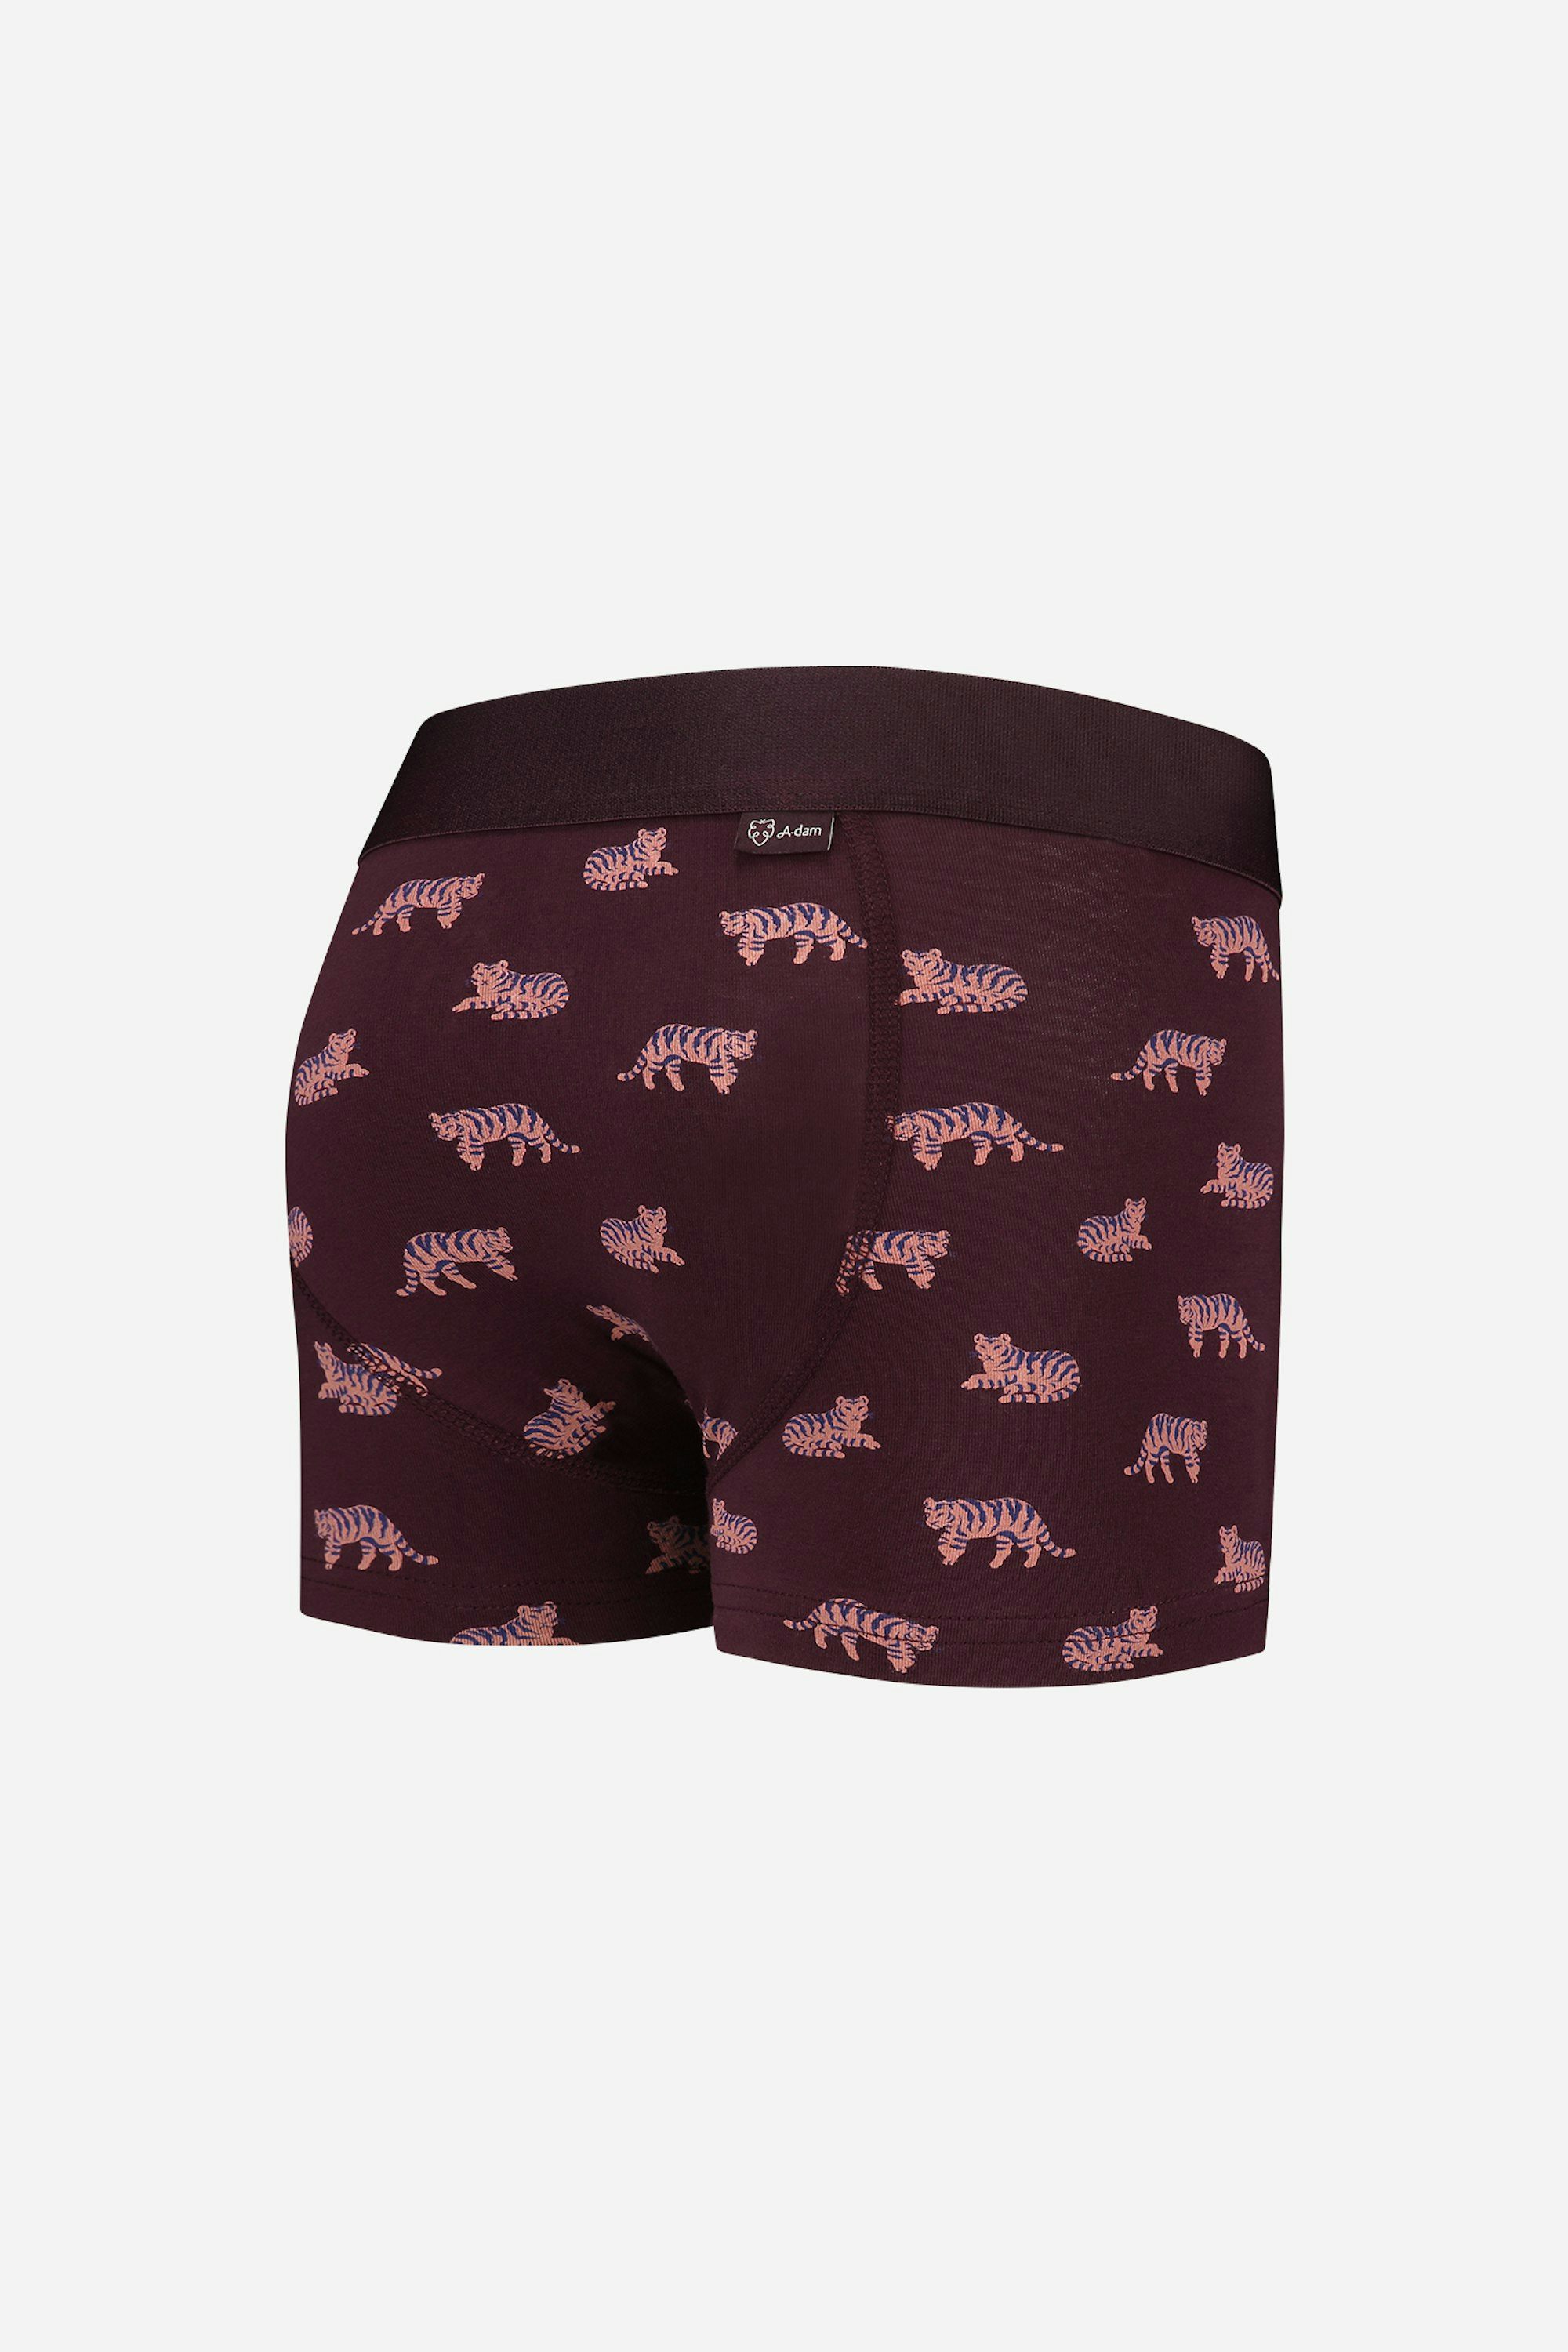 A-dam Boys Boxer briefs with purple tigers from GOTS organic